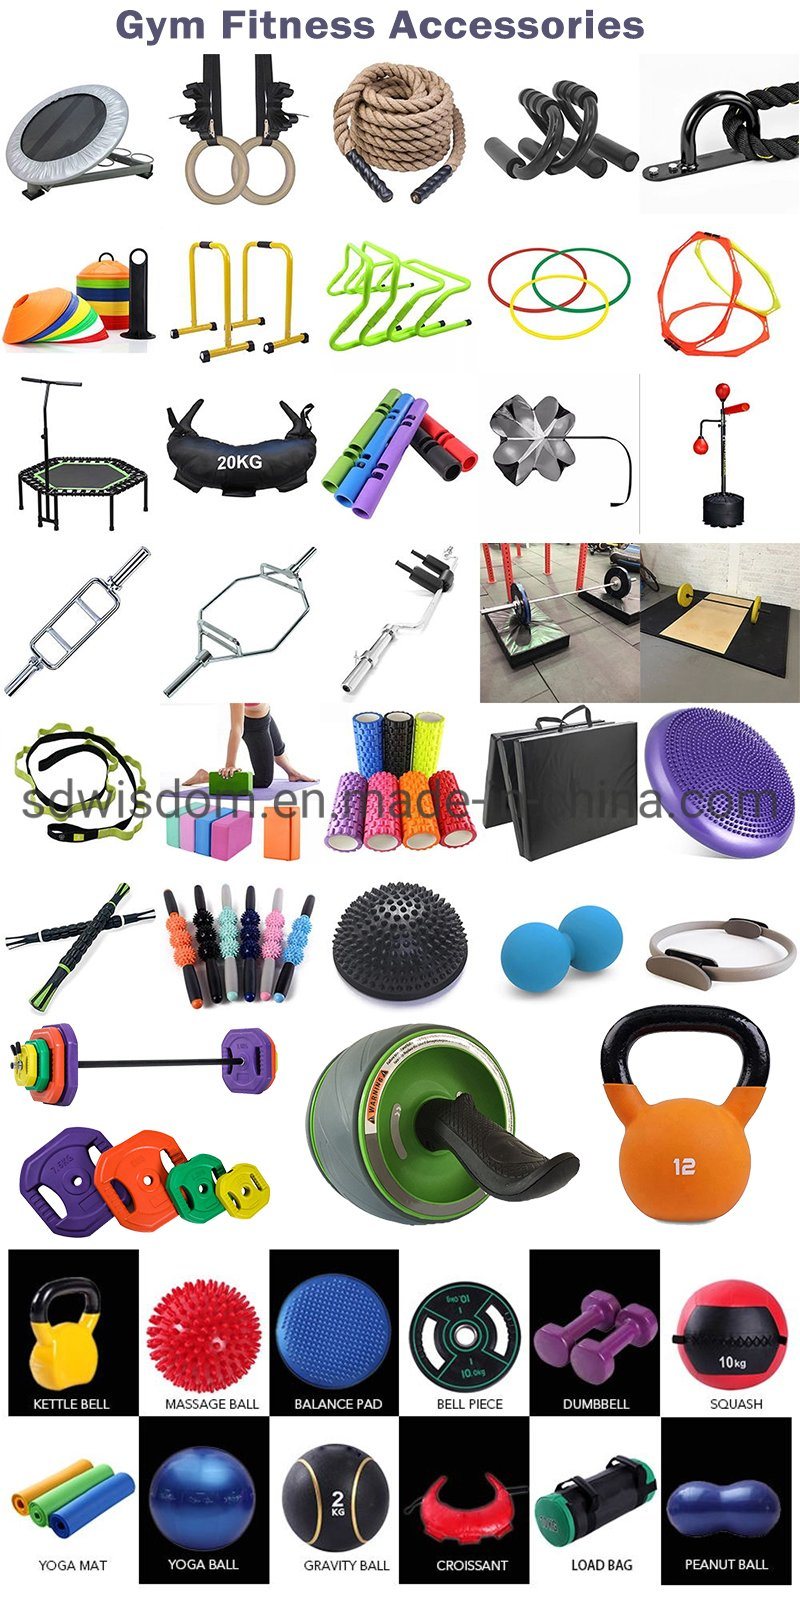 Ms1013 Bodybuilding Sports Gym Fitness Machine Commercial Exercise Equipment Fully Packed Gym Equipment Buttefly/ Pectoral Fly